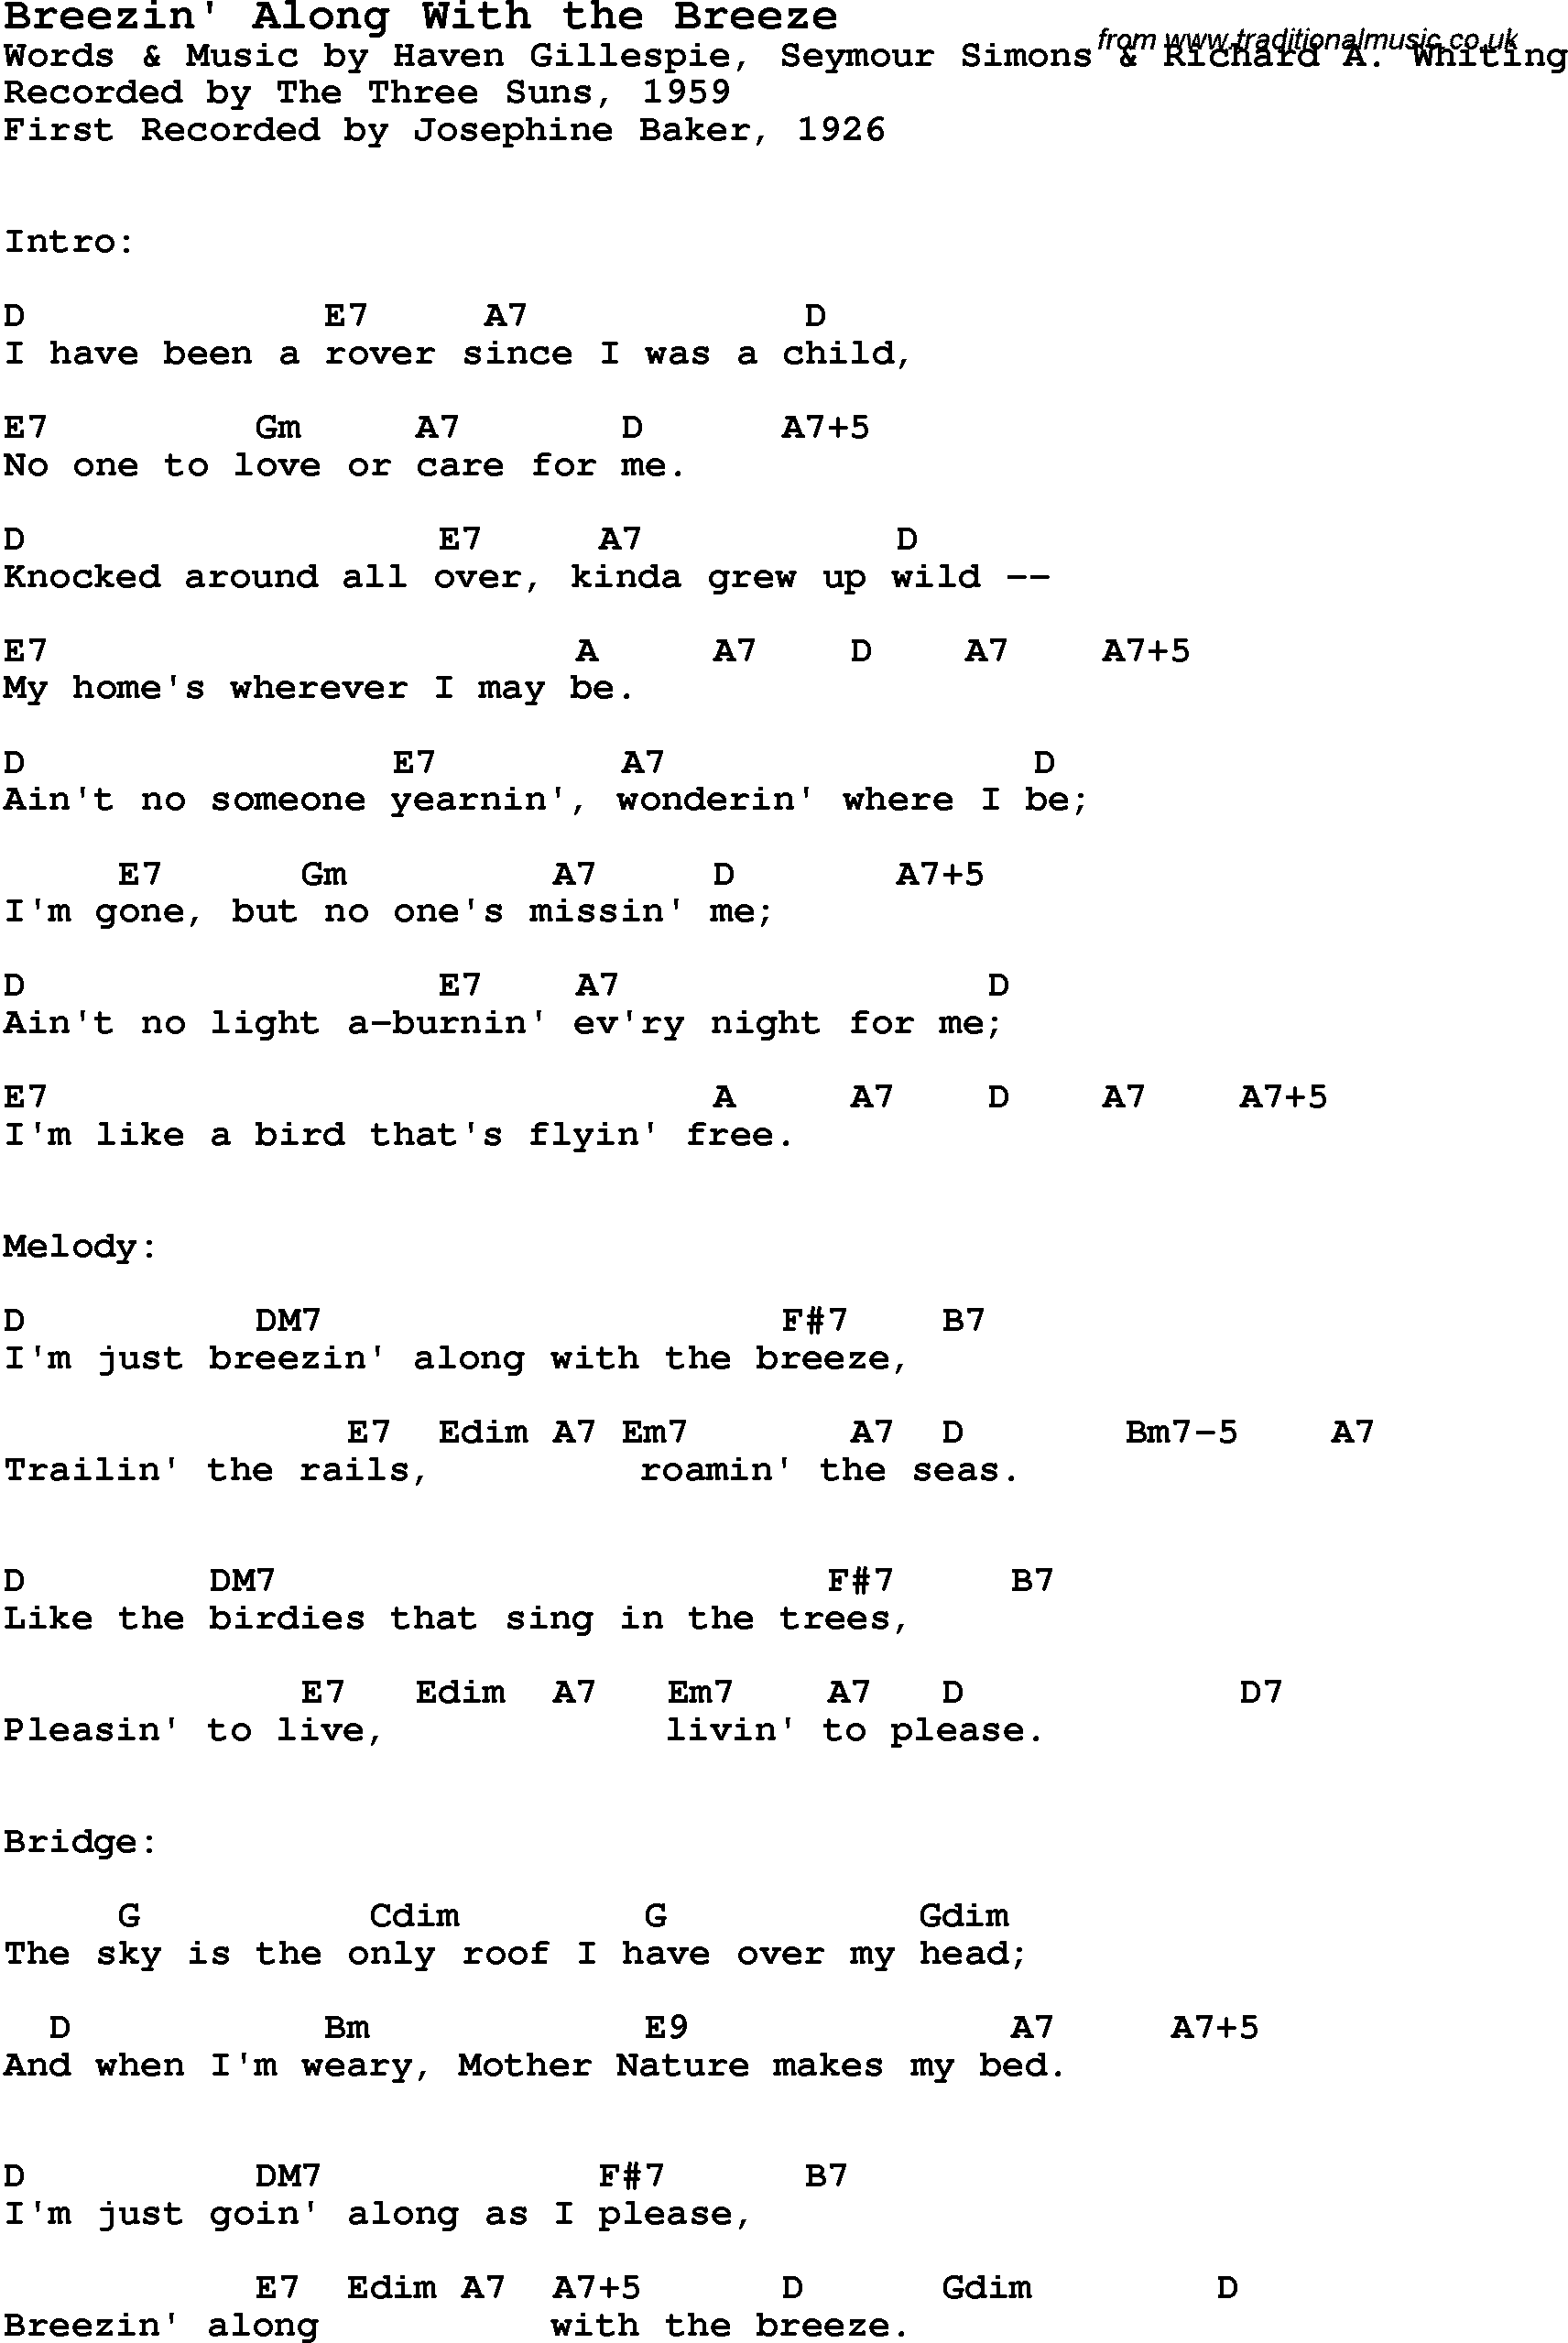 Song Lyrics with guitar chords for Breezin' Along With The Breeze - The Three Suns, 1959